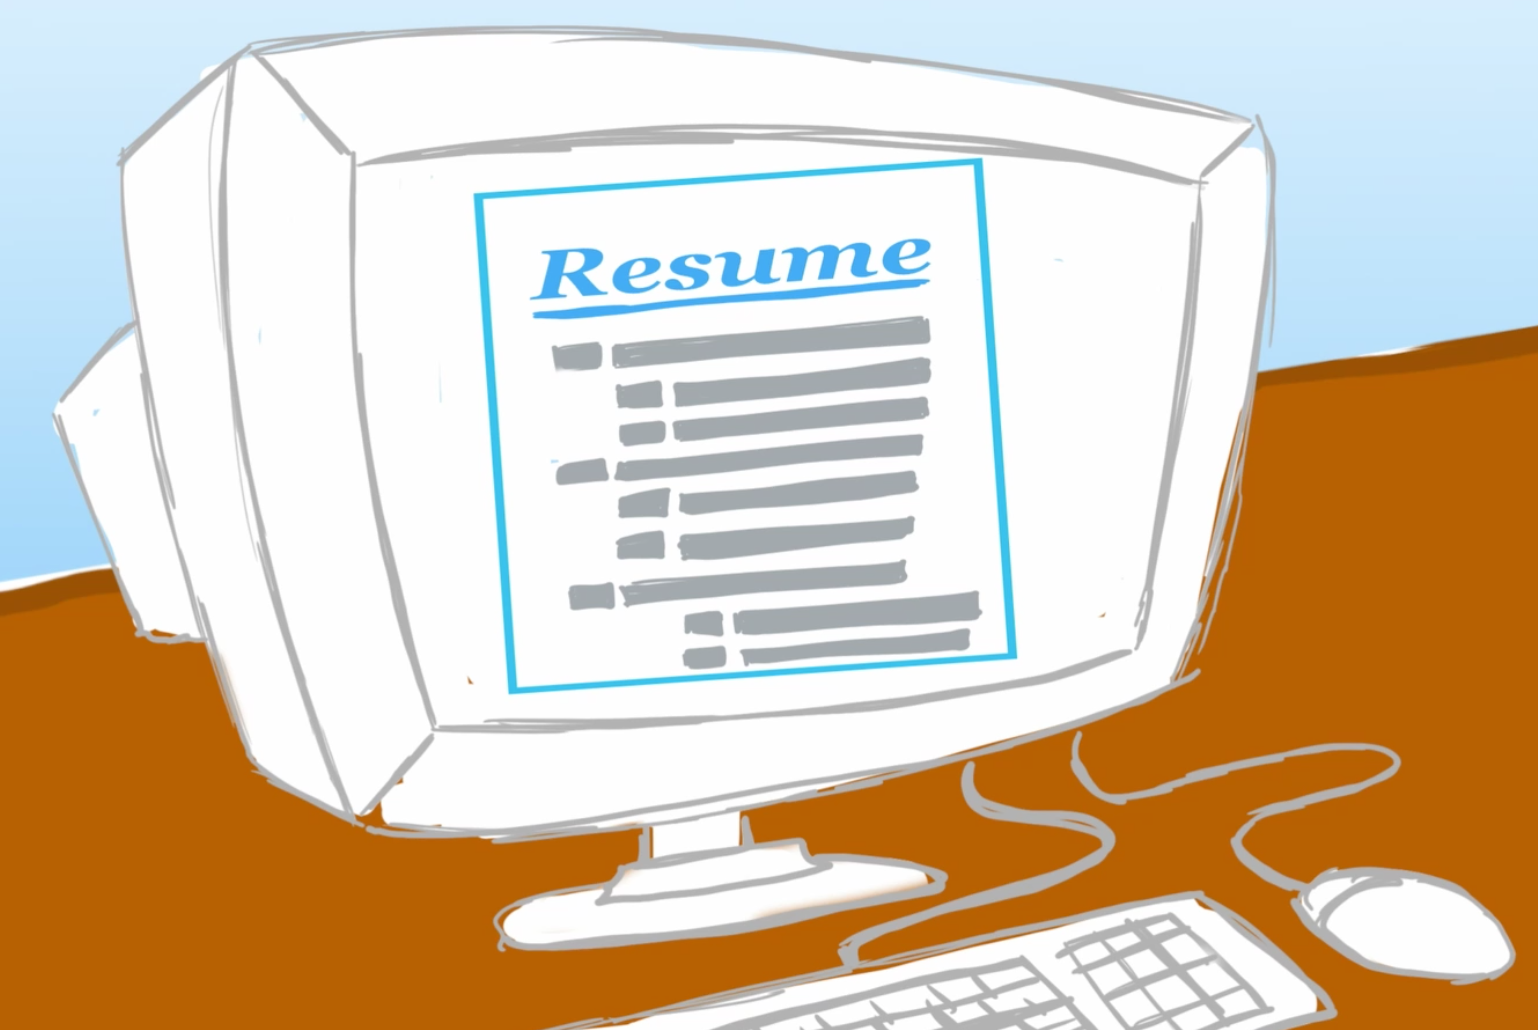 Cartoon image of a computer with a resume on the screen